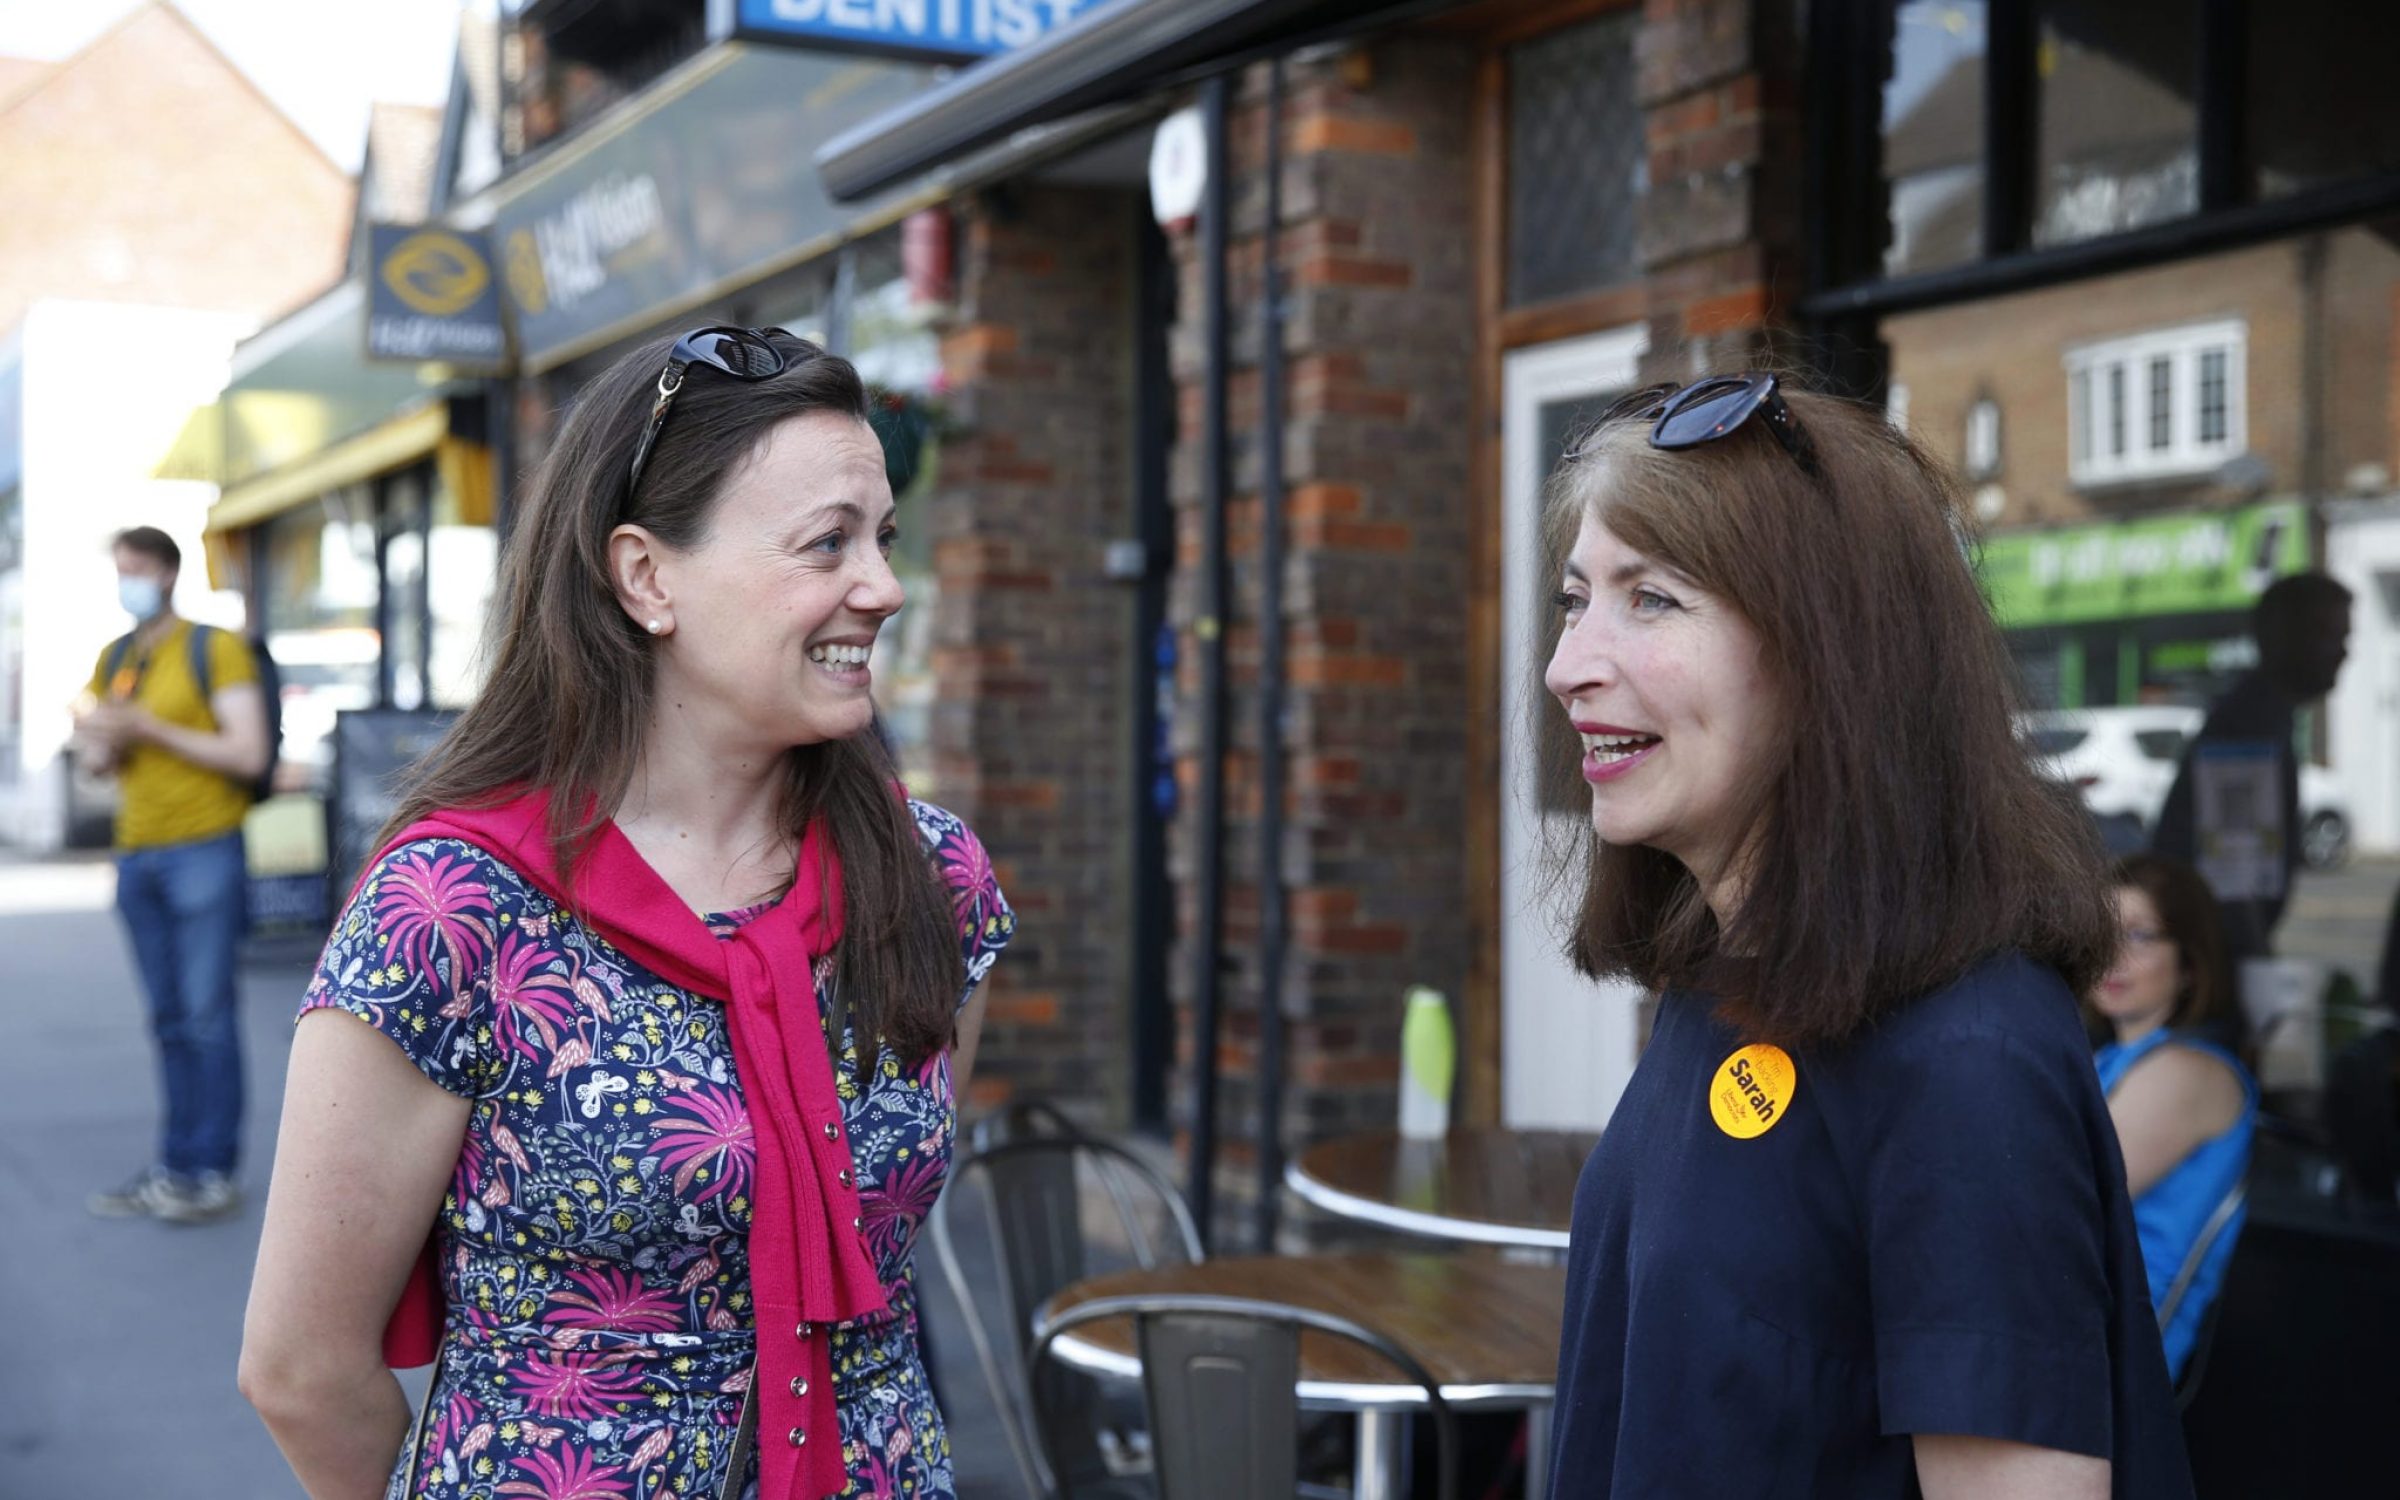 Sarah Green, candidate for Chesham and Amersham, speaks to a woman while canvassing. Photo: Hollie Adams via Getty Images